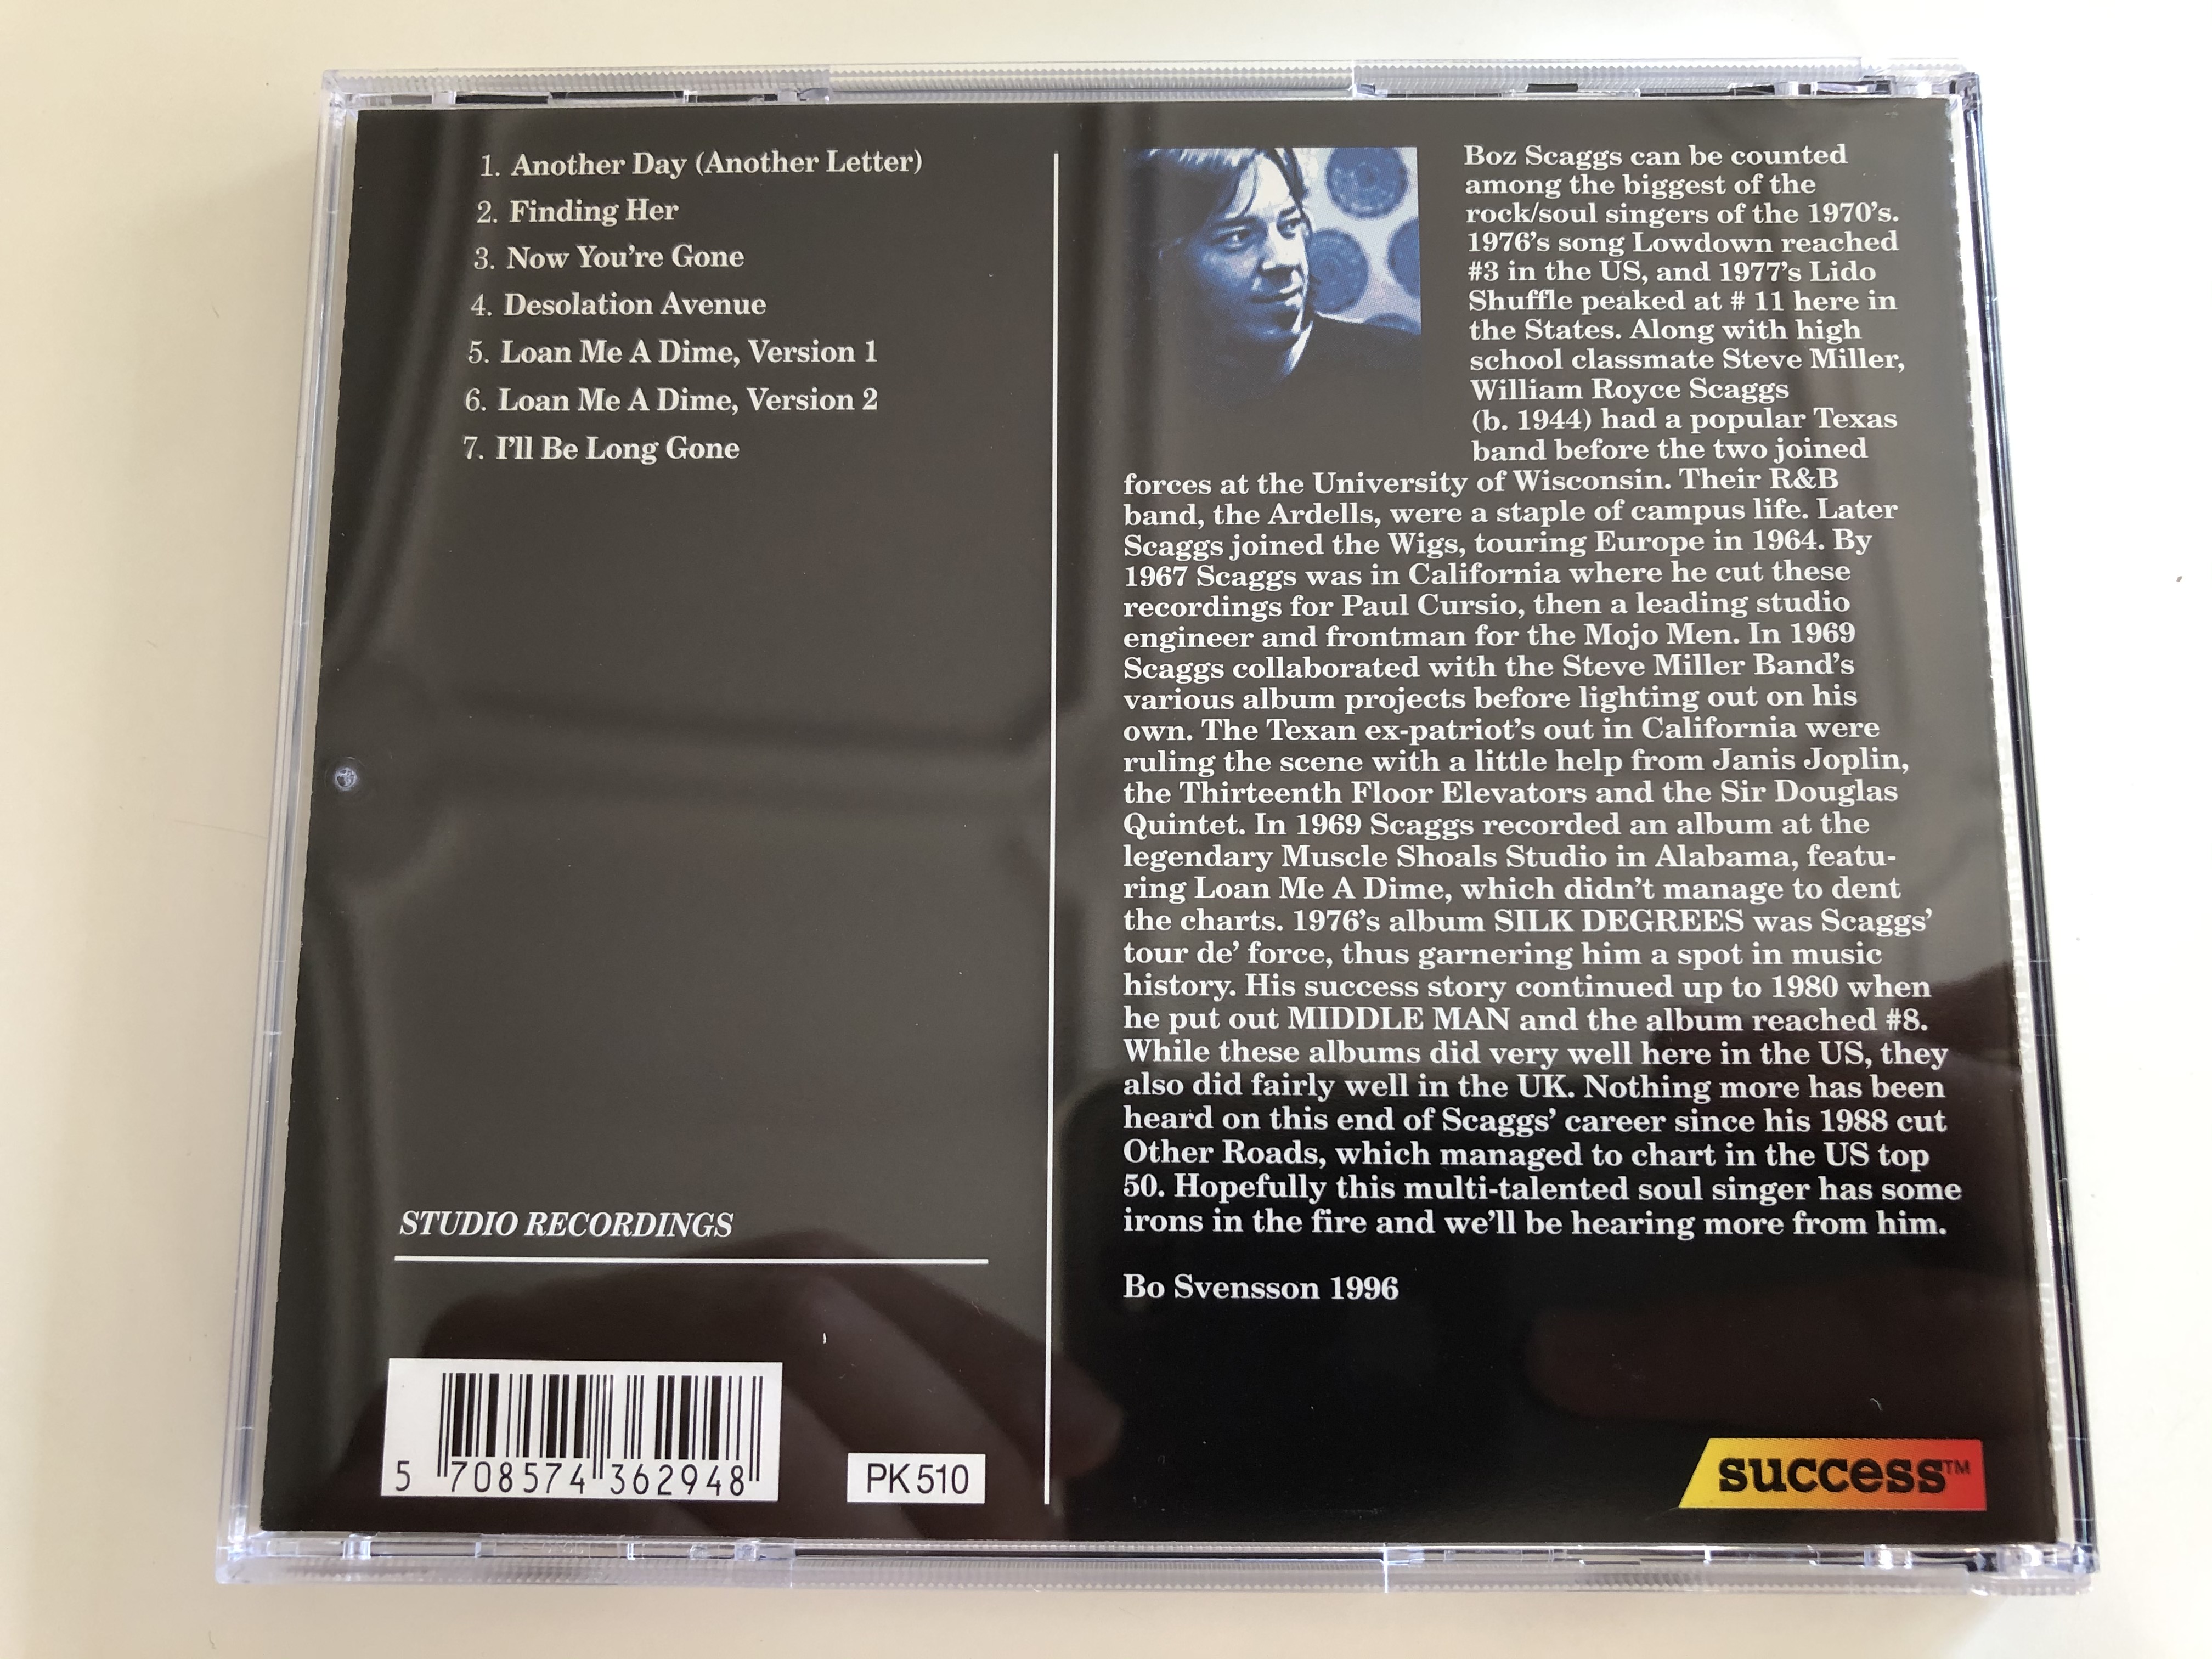 boz-scaggs-back-in-the-days-biographical-details-on-the-back-success-audio-cd-1996-16294cd-4-.jpg